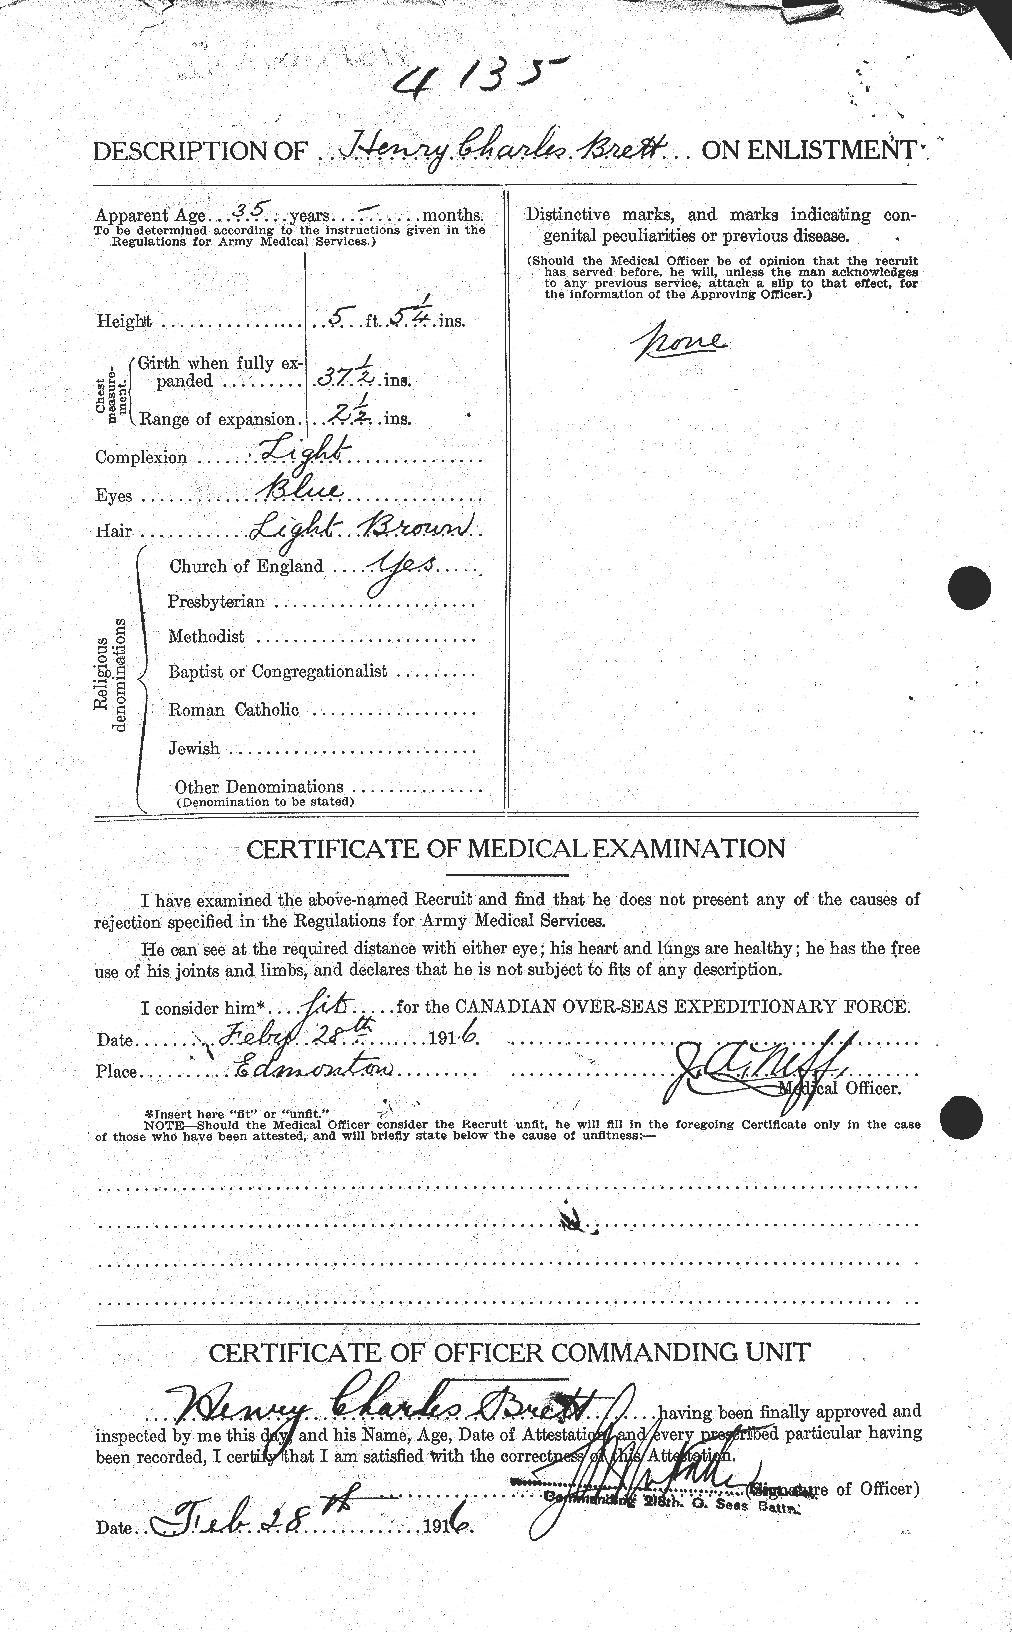 Personnel Records of the First World War - CEF 258832b